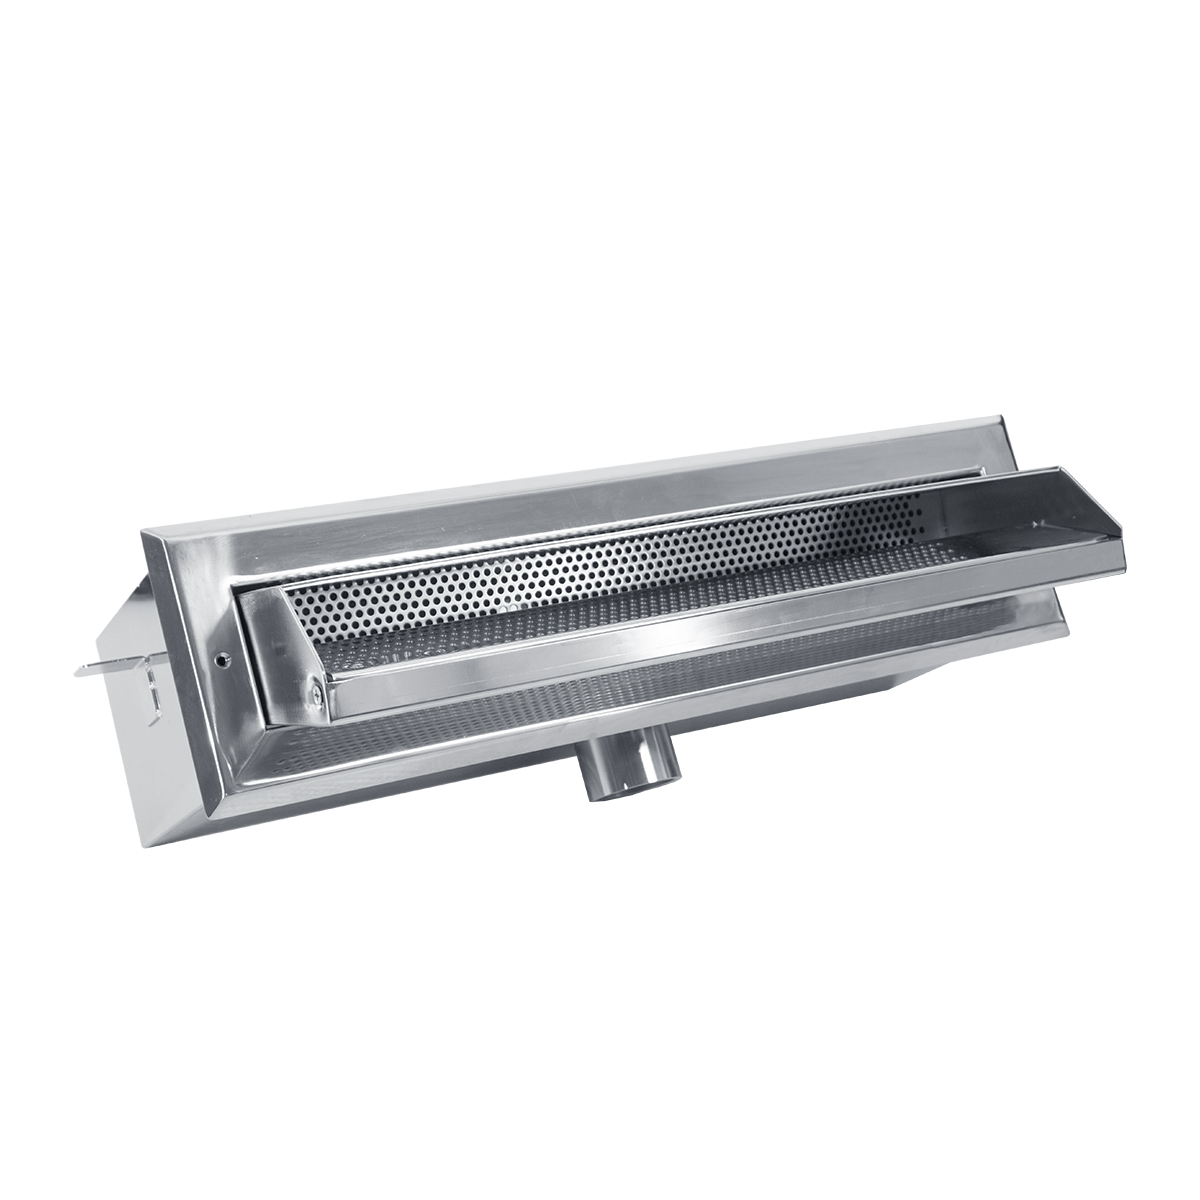 Smart high water level skimmer stainless steel V4A 400 for liner pools with frontal removable basket with integrated holder for niveau control Smart high water level skimmer stainless steel V4A 400 for liner pools with frontal removable basket with integrated holder for niveau control